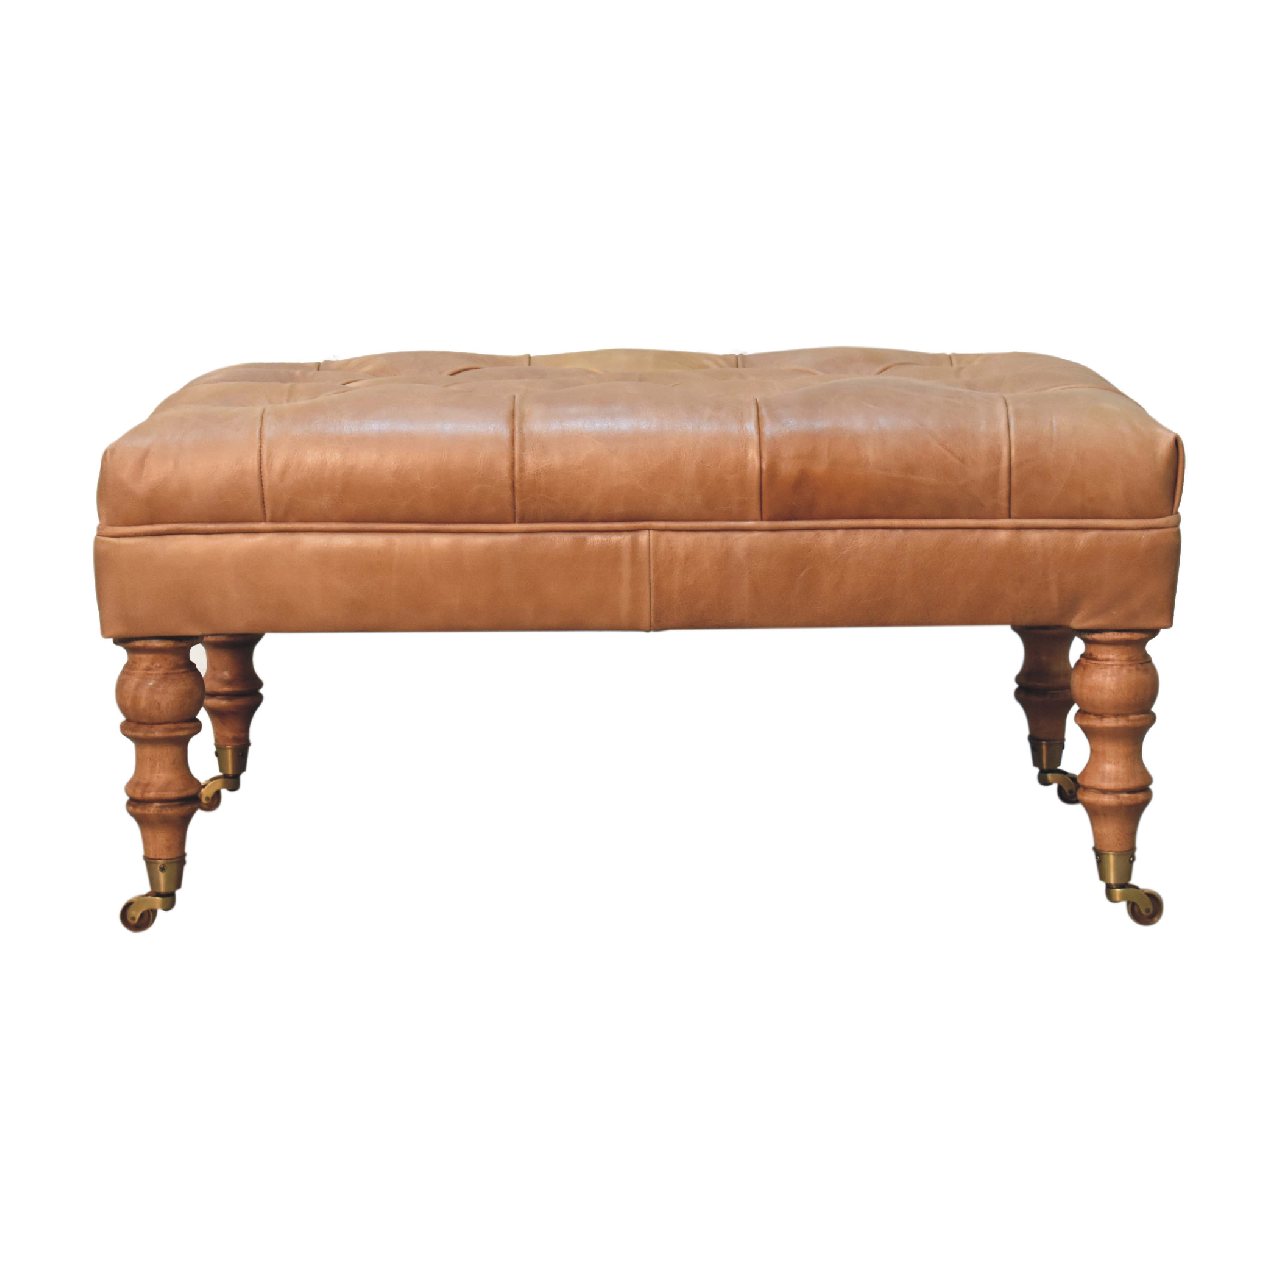 View Buffalo Tan Leather Ottoman with Castor Legs information